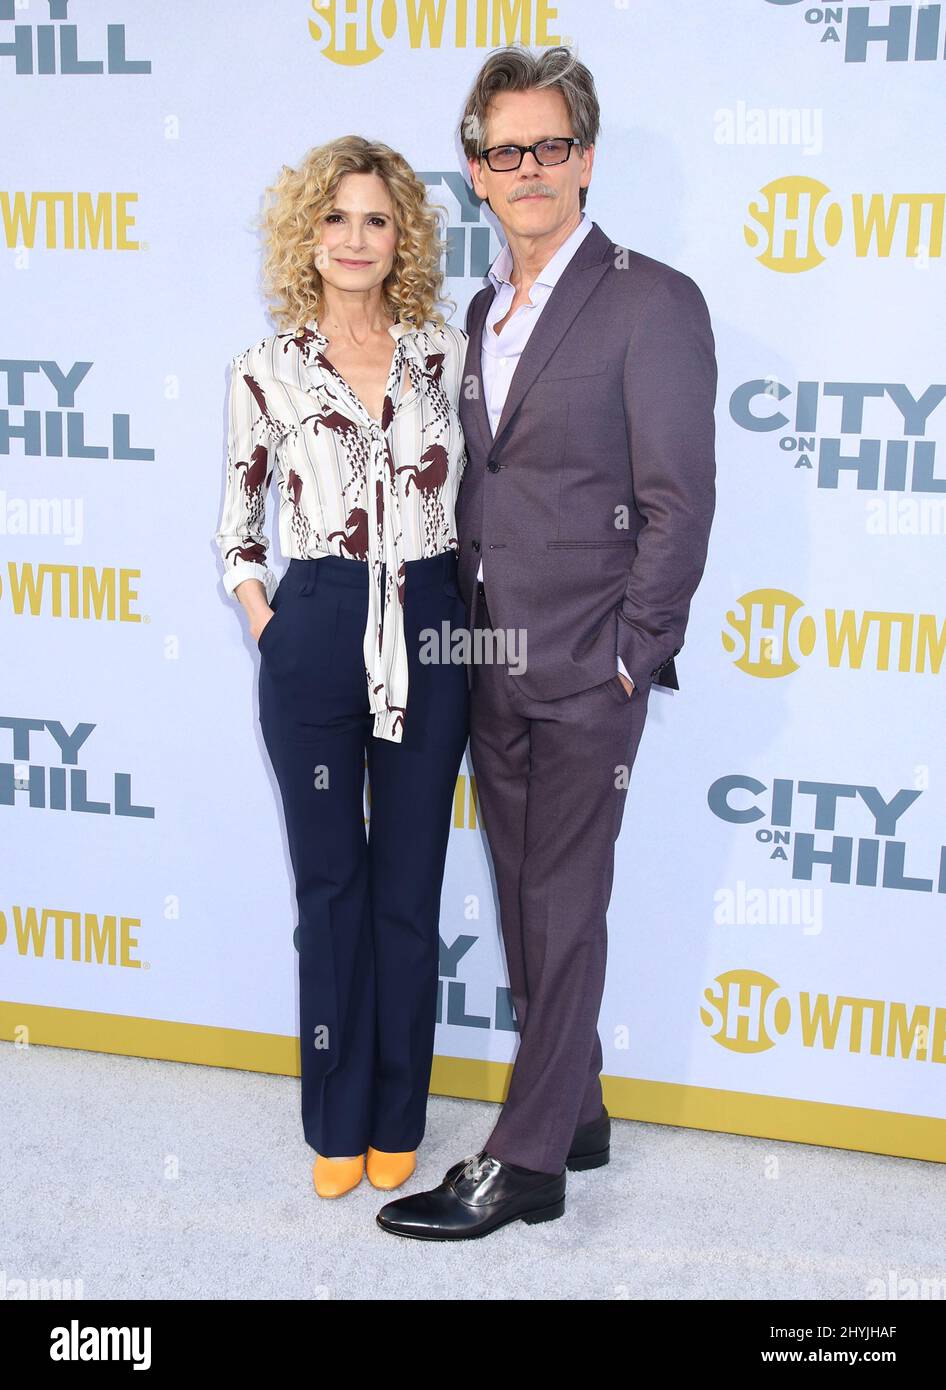 Kyra Sedgwick & Kevin Bacon bei der Premiere von Showtime's City on A Hill in New York Stockfoto